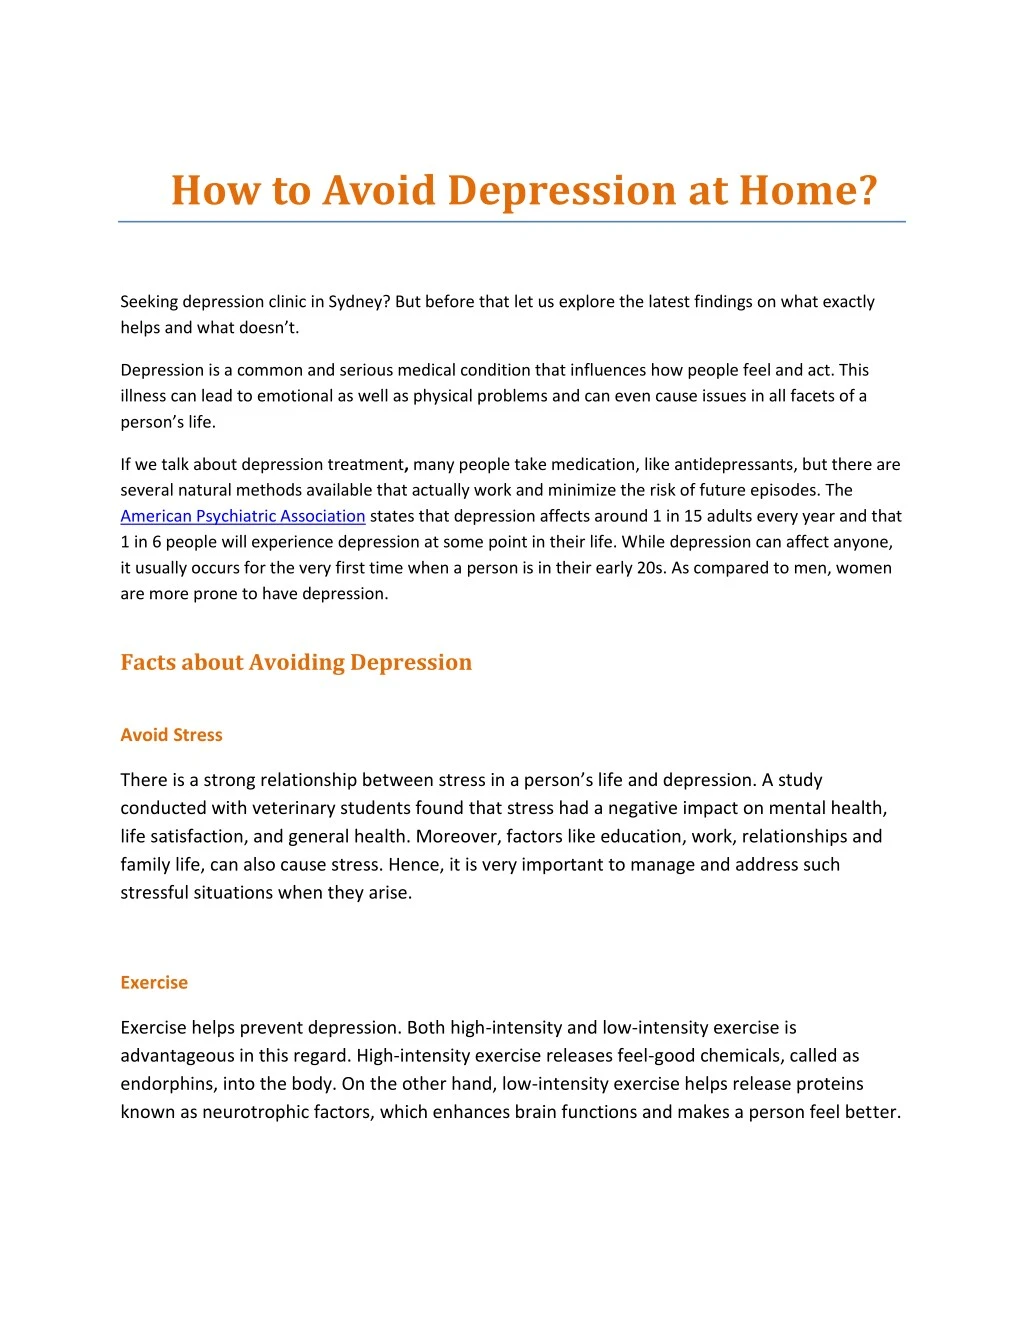 how to avoid depression at home